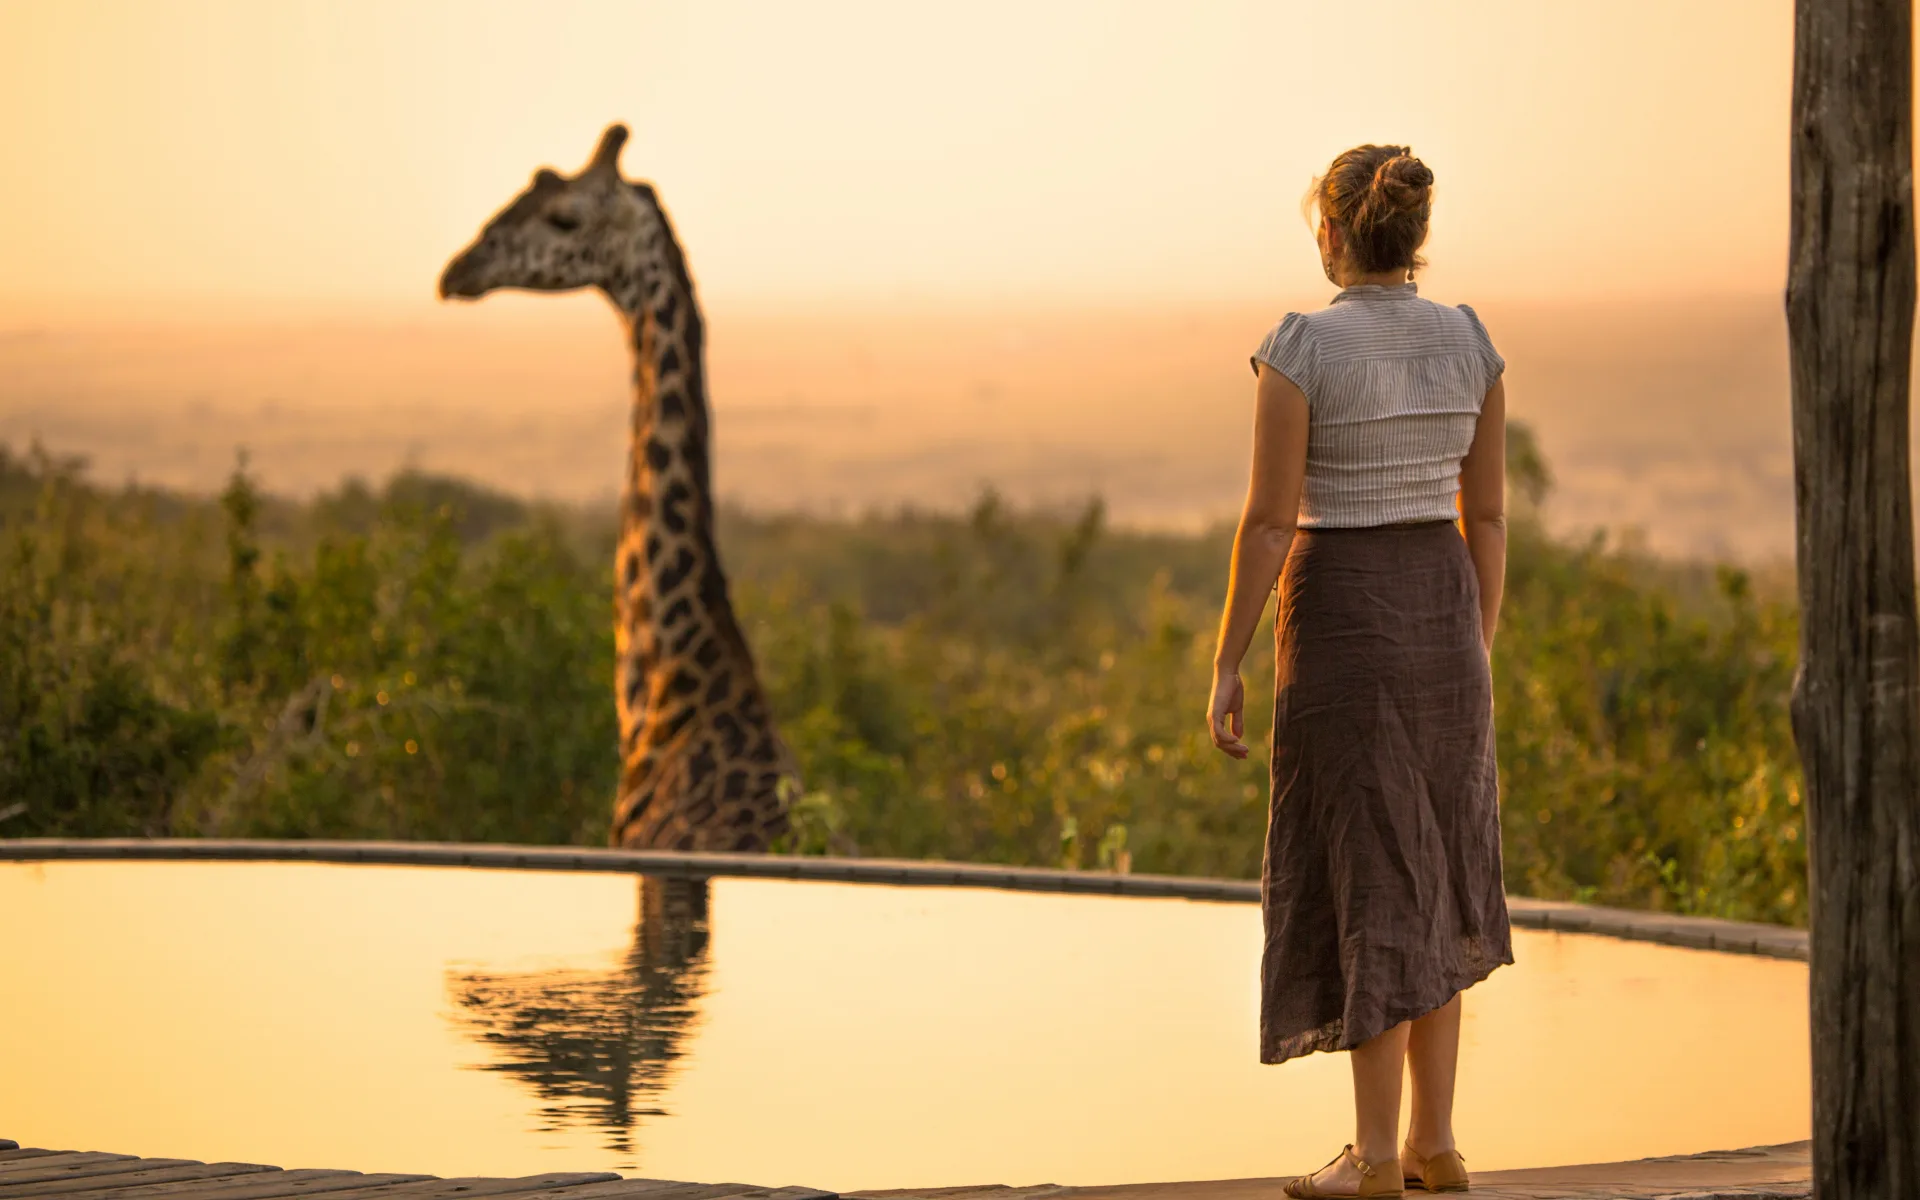 A giraffe peaks out from beyond the infinity pool walls. A lady stands and gazes at it during a vibrant, orange sunset.